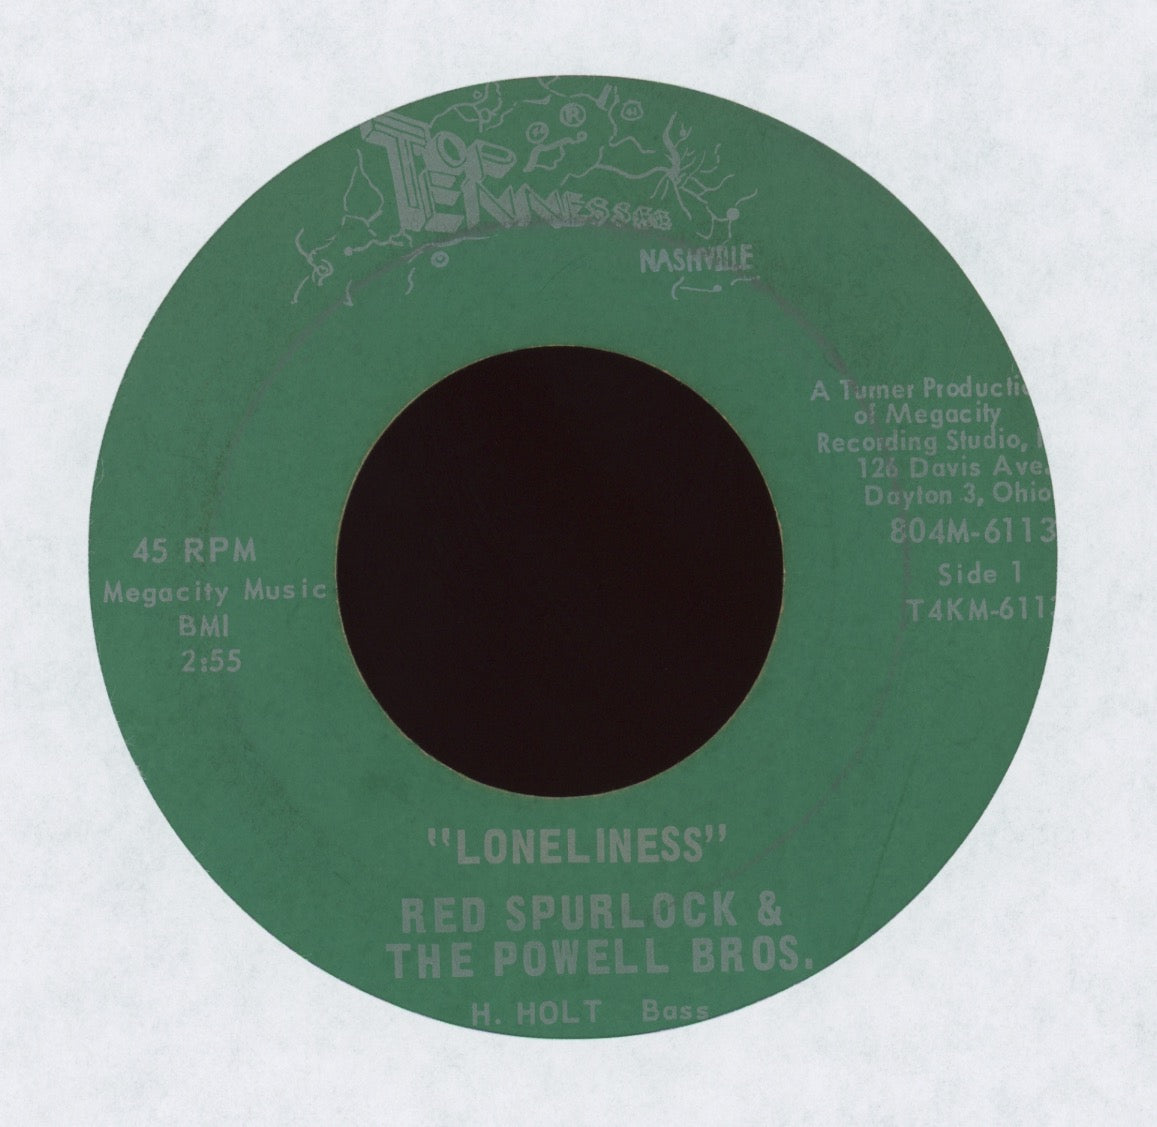 Red Spurlock - Loneliness on Top Tennessee Nashville